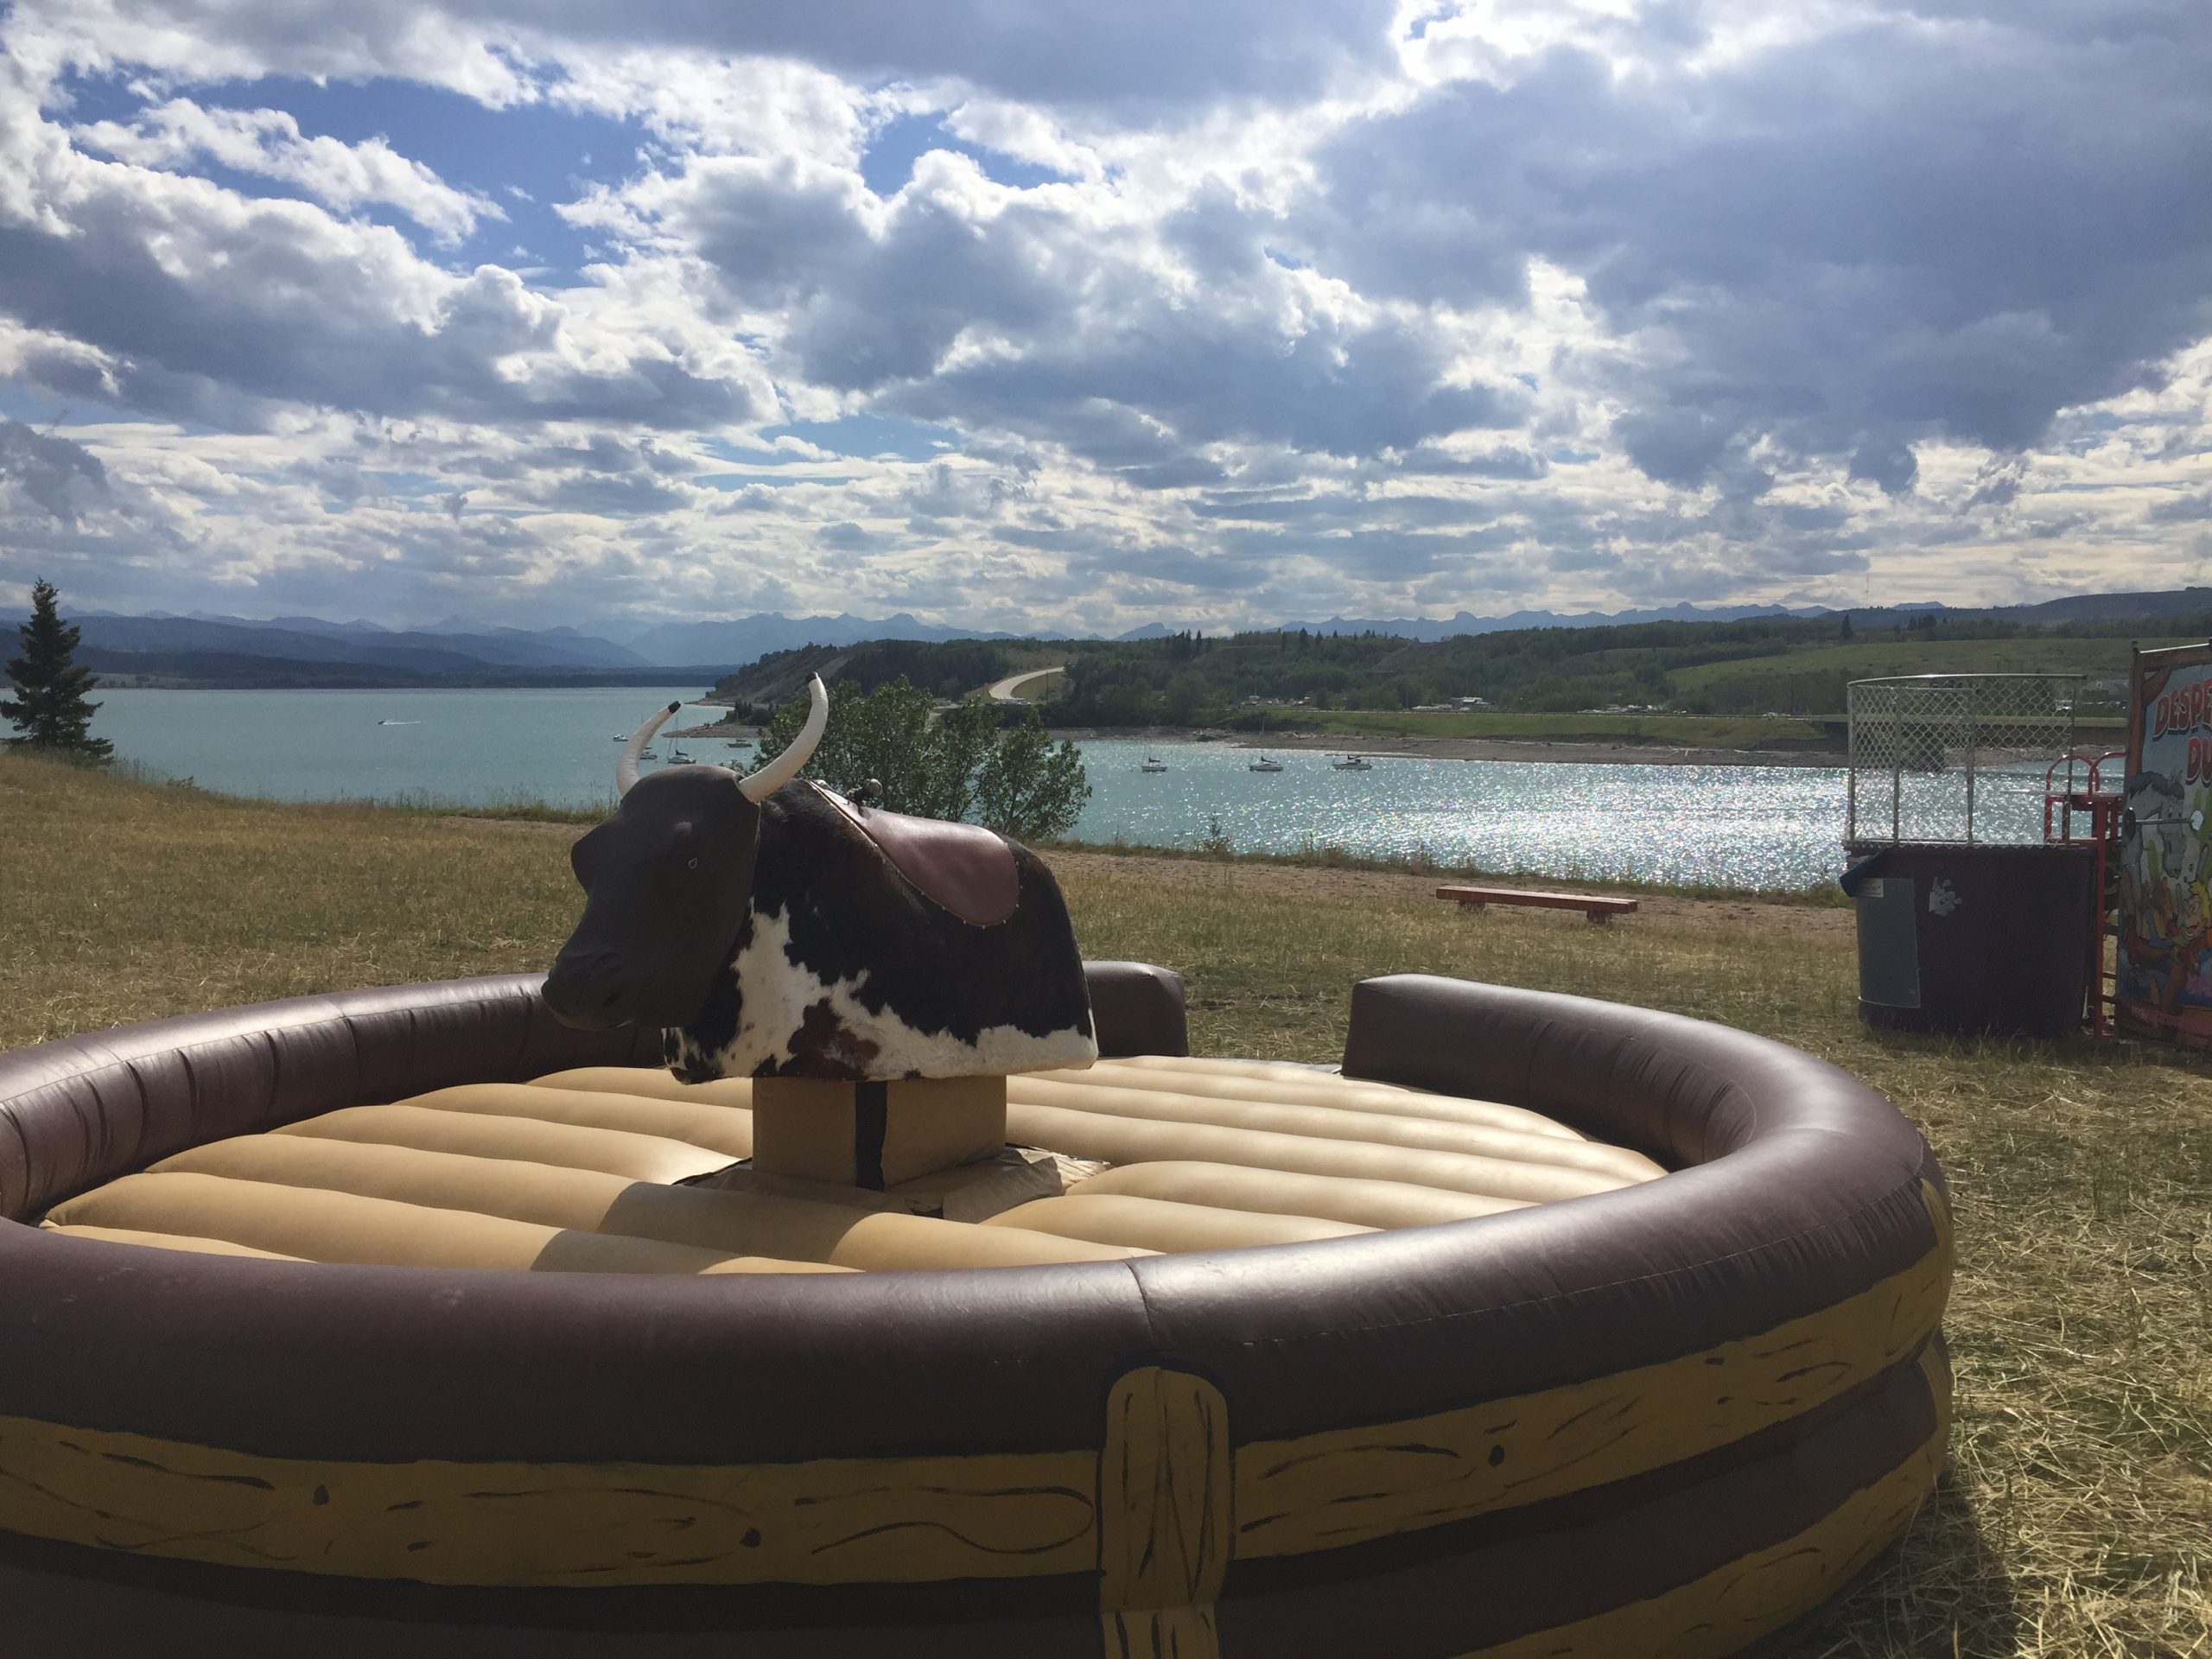 Mechanical Bull by Water